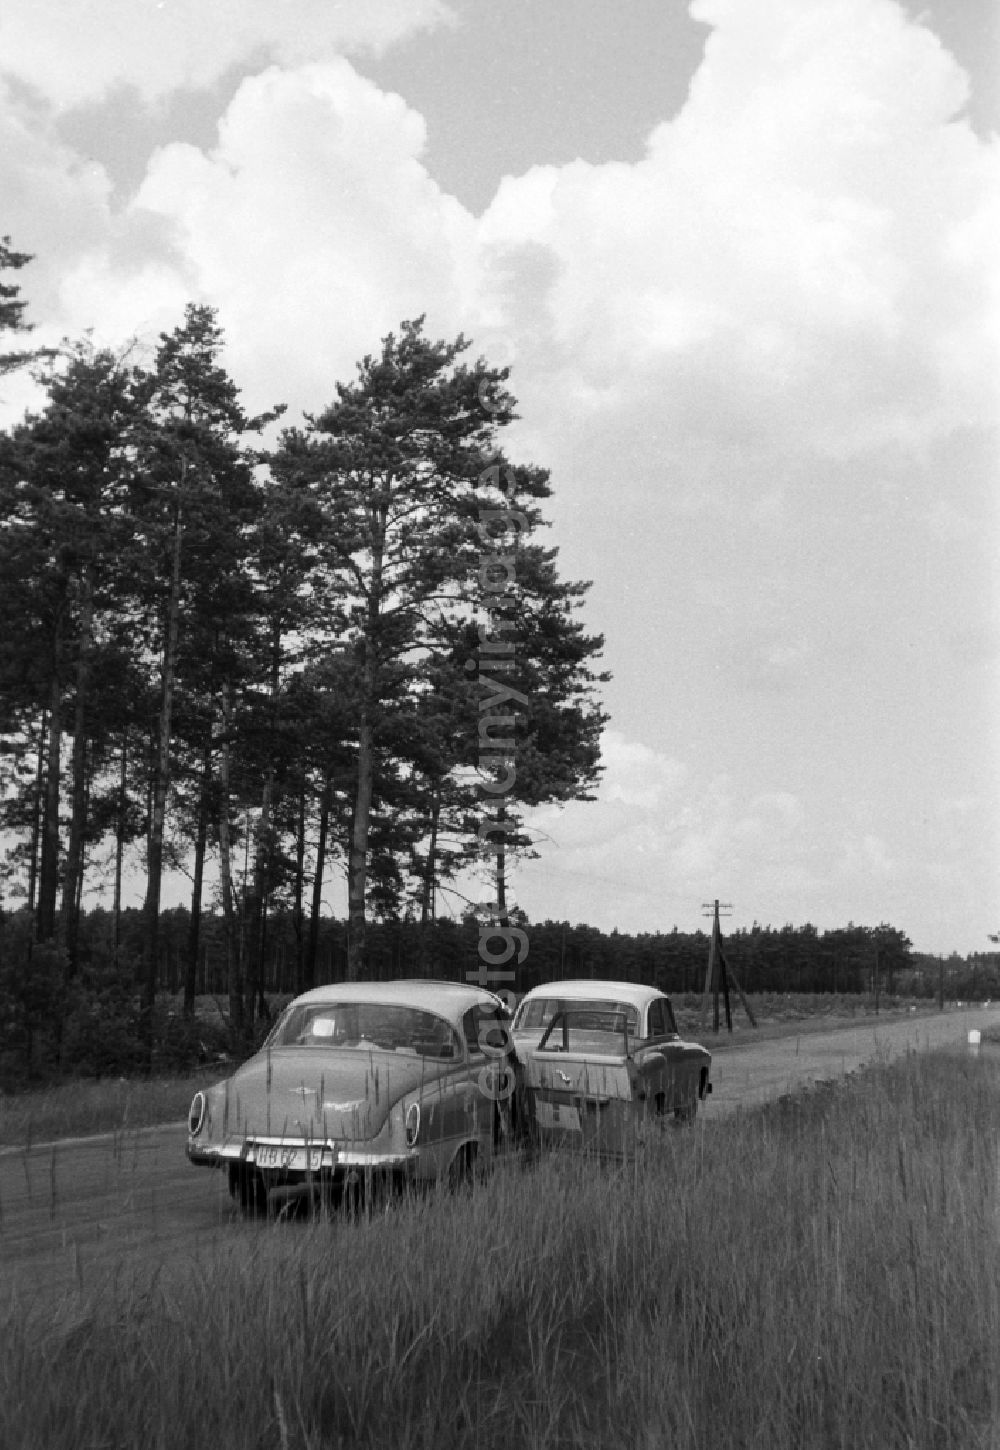 GDR image archive: Magdeburg - 2 branded cars Wartburg 311 parked on a country road in Brandenburg